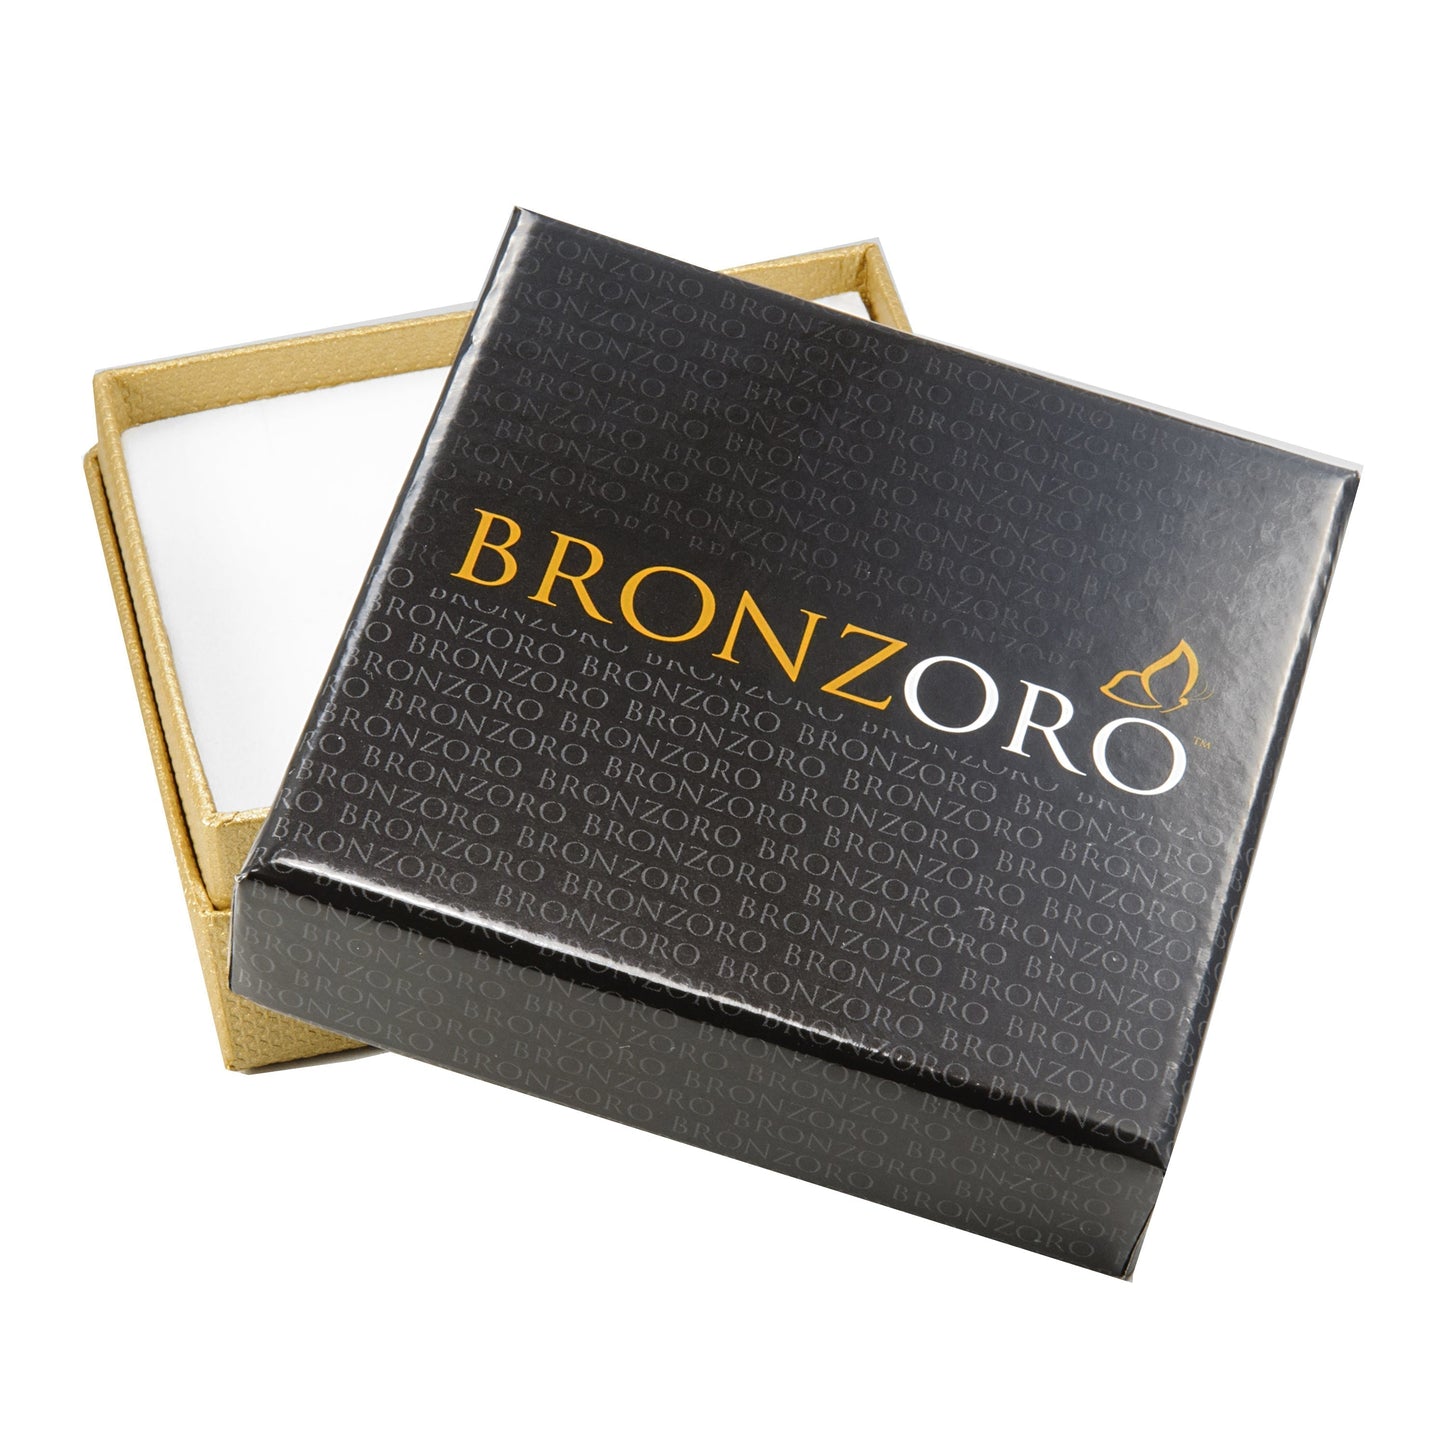 Bronzoro Yellow gold 5Mm Wide Chain Link Ring In Frame